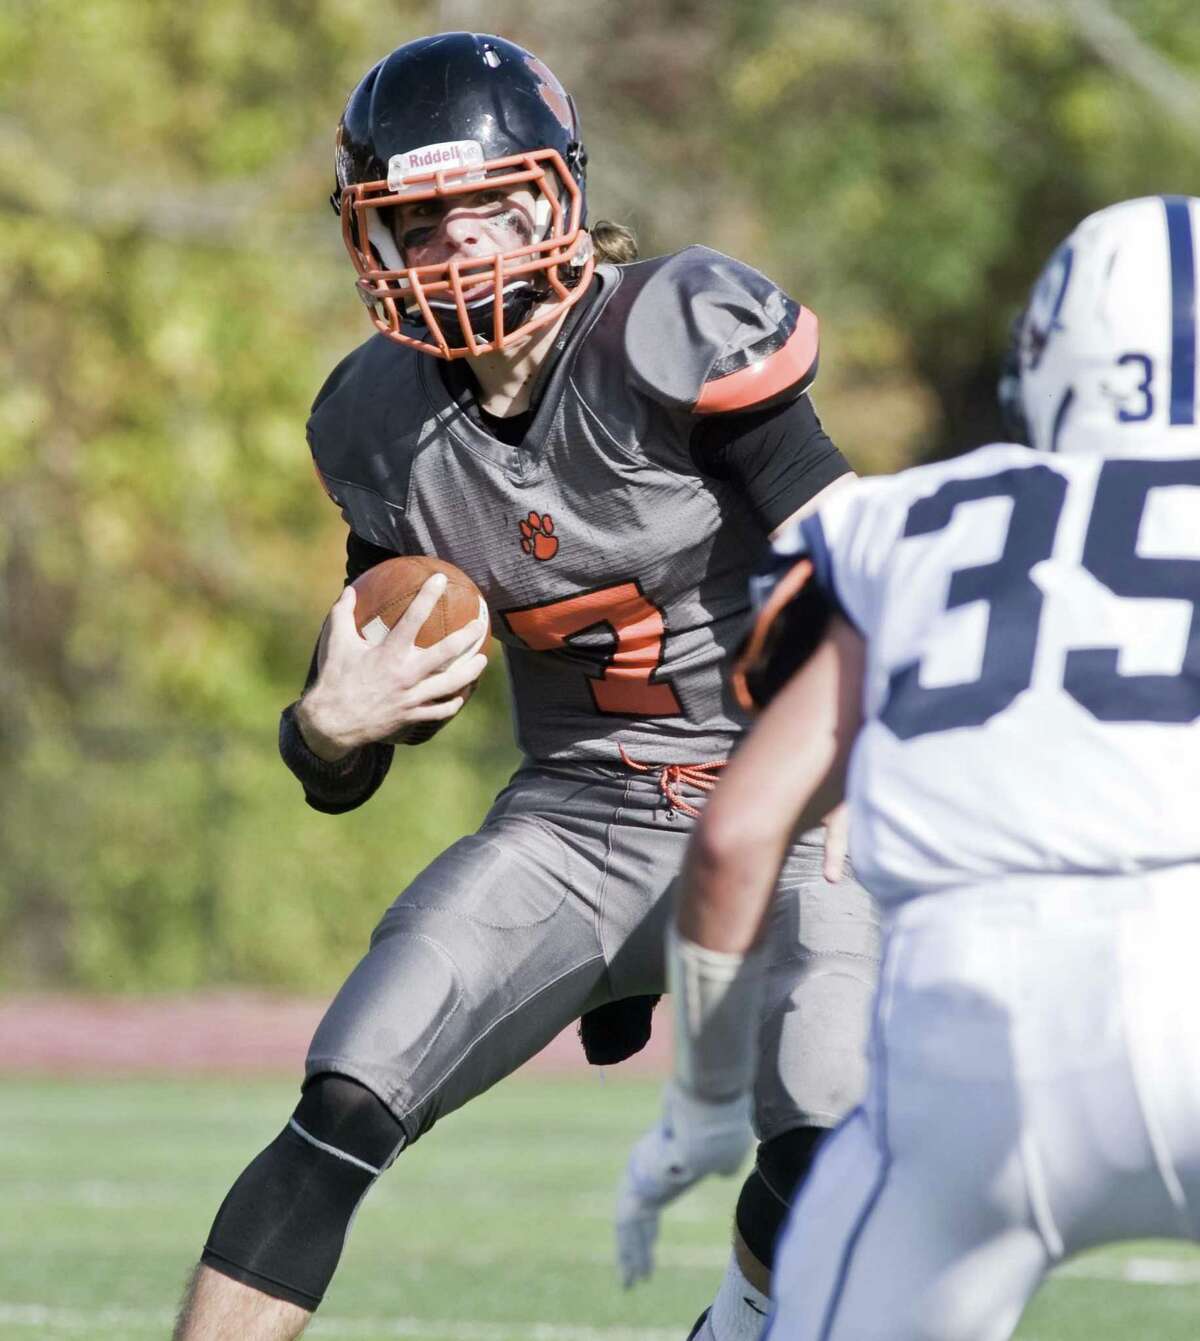 Ridgefield High senior quarterback Greg Gatto has thrown for 1,983 yards and 25 touchdowns in leading the Tigers to a 5-2 record.